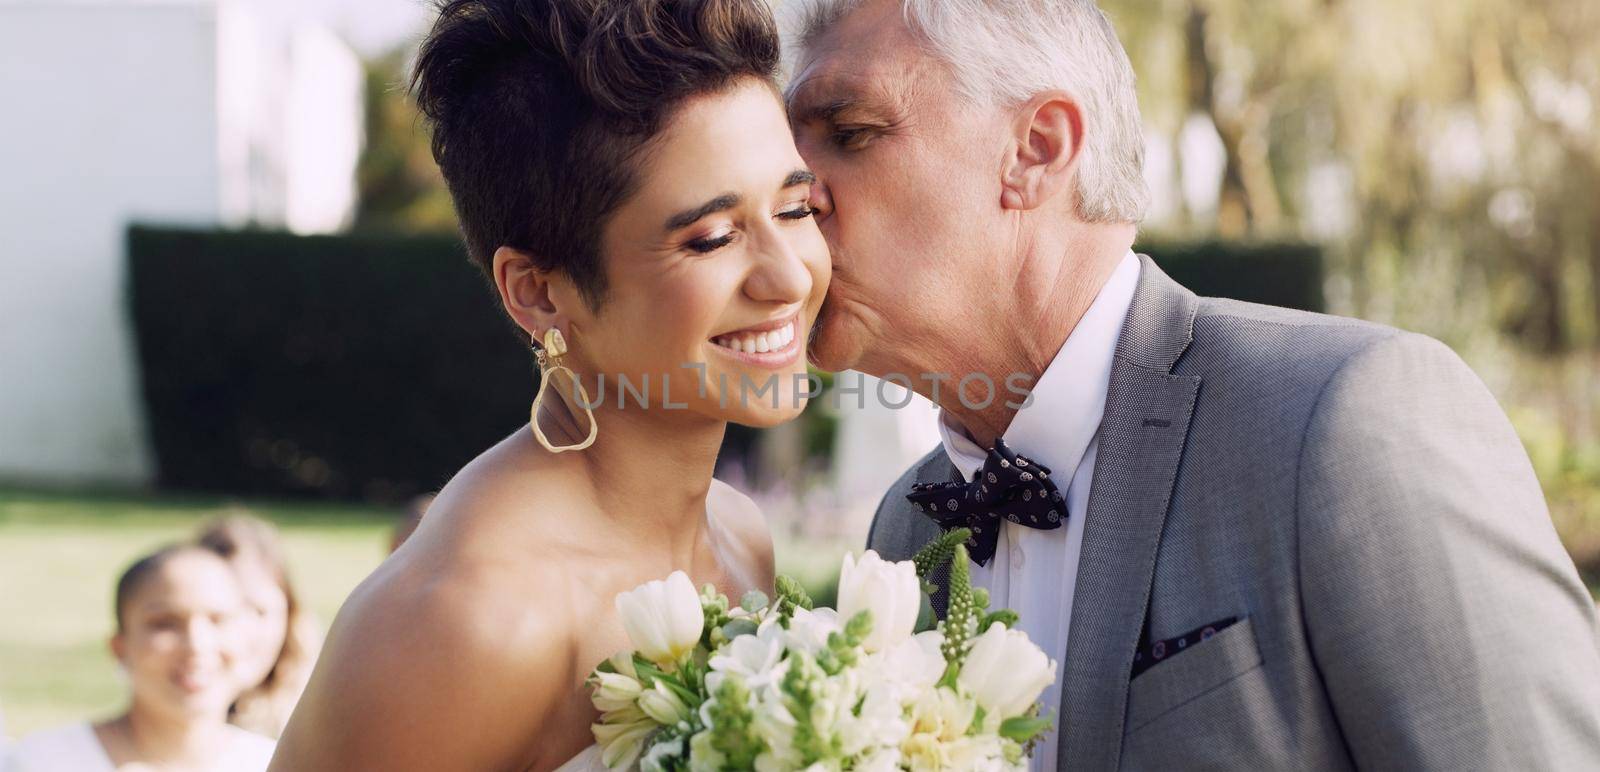 Cropped shot of an affectionate mature father kissing his daughter on the cheek on her wedding day.